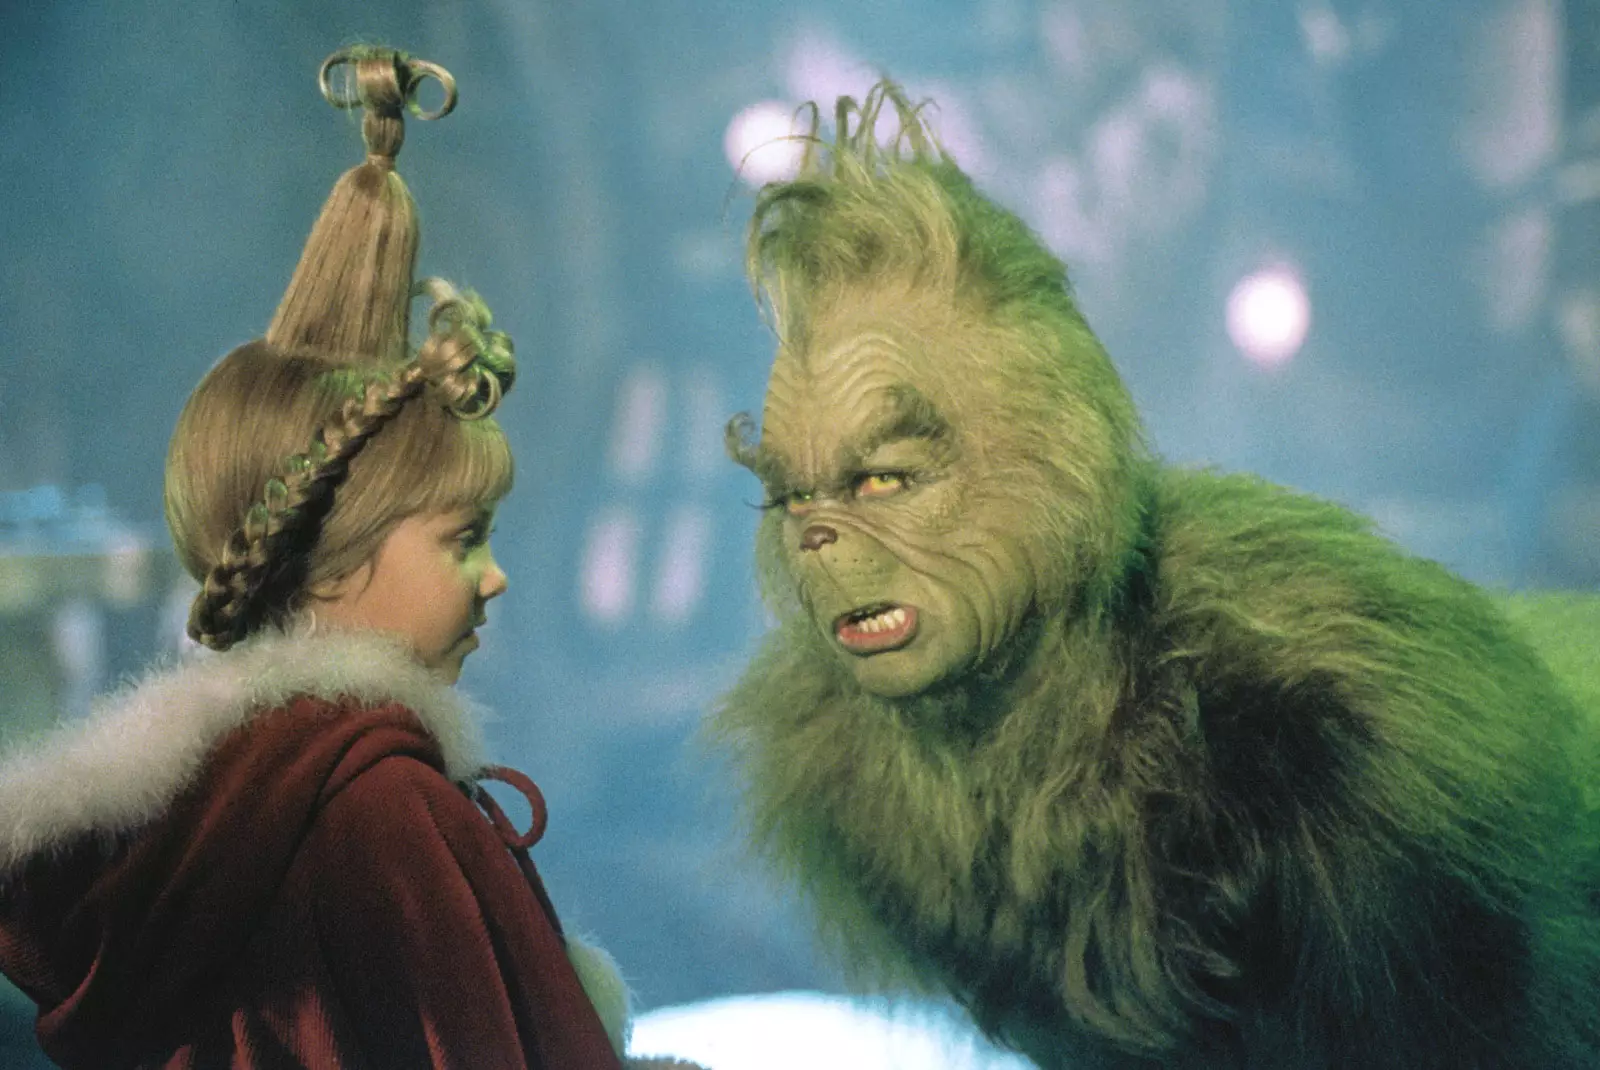 The Grinch is one of the most popular Dr. Seuss books. It was adapted into a film in 2000 starring Jim Carey (